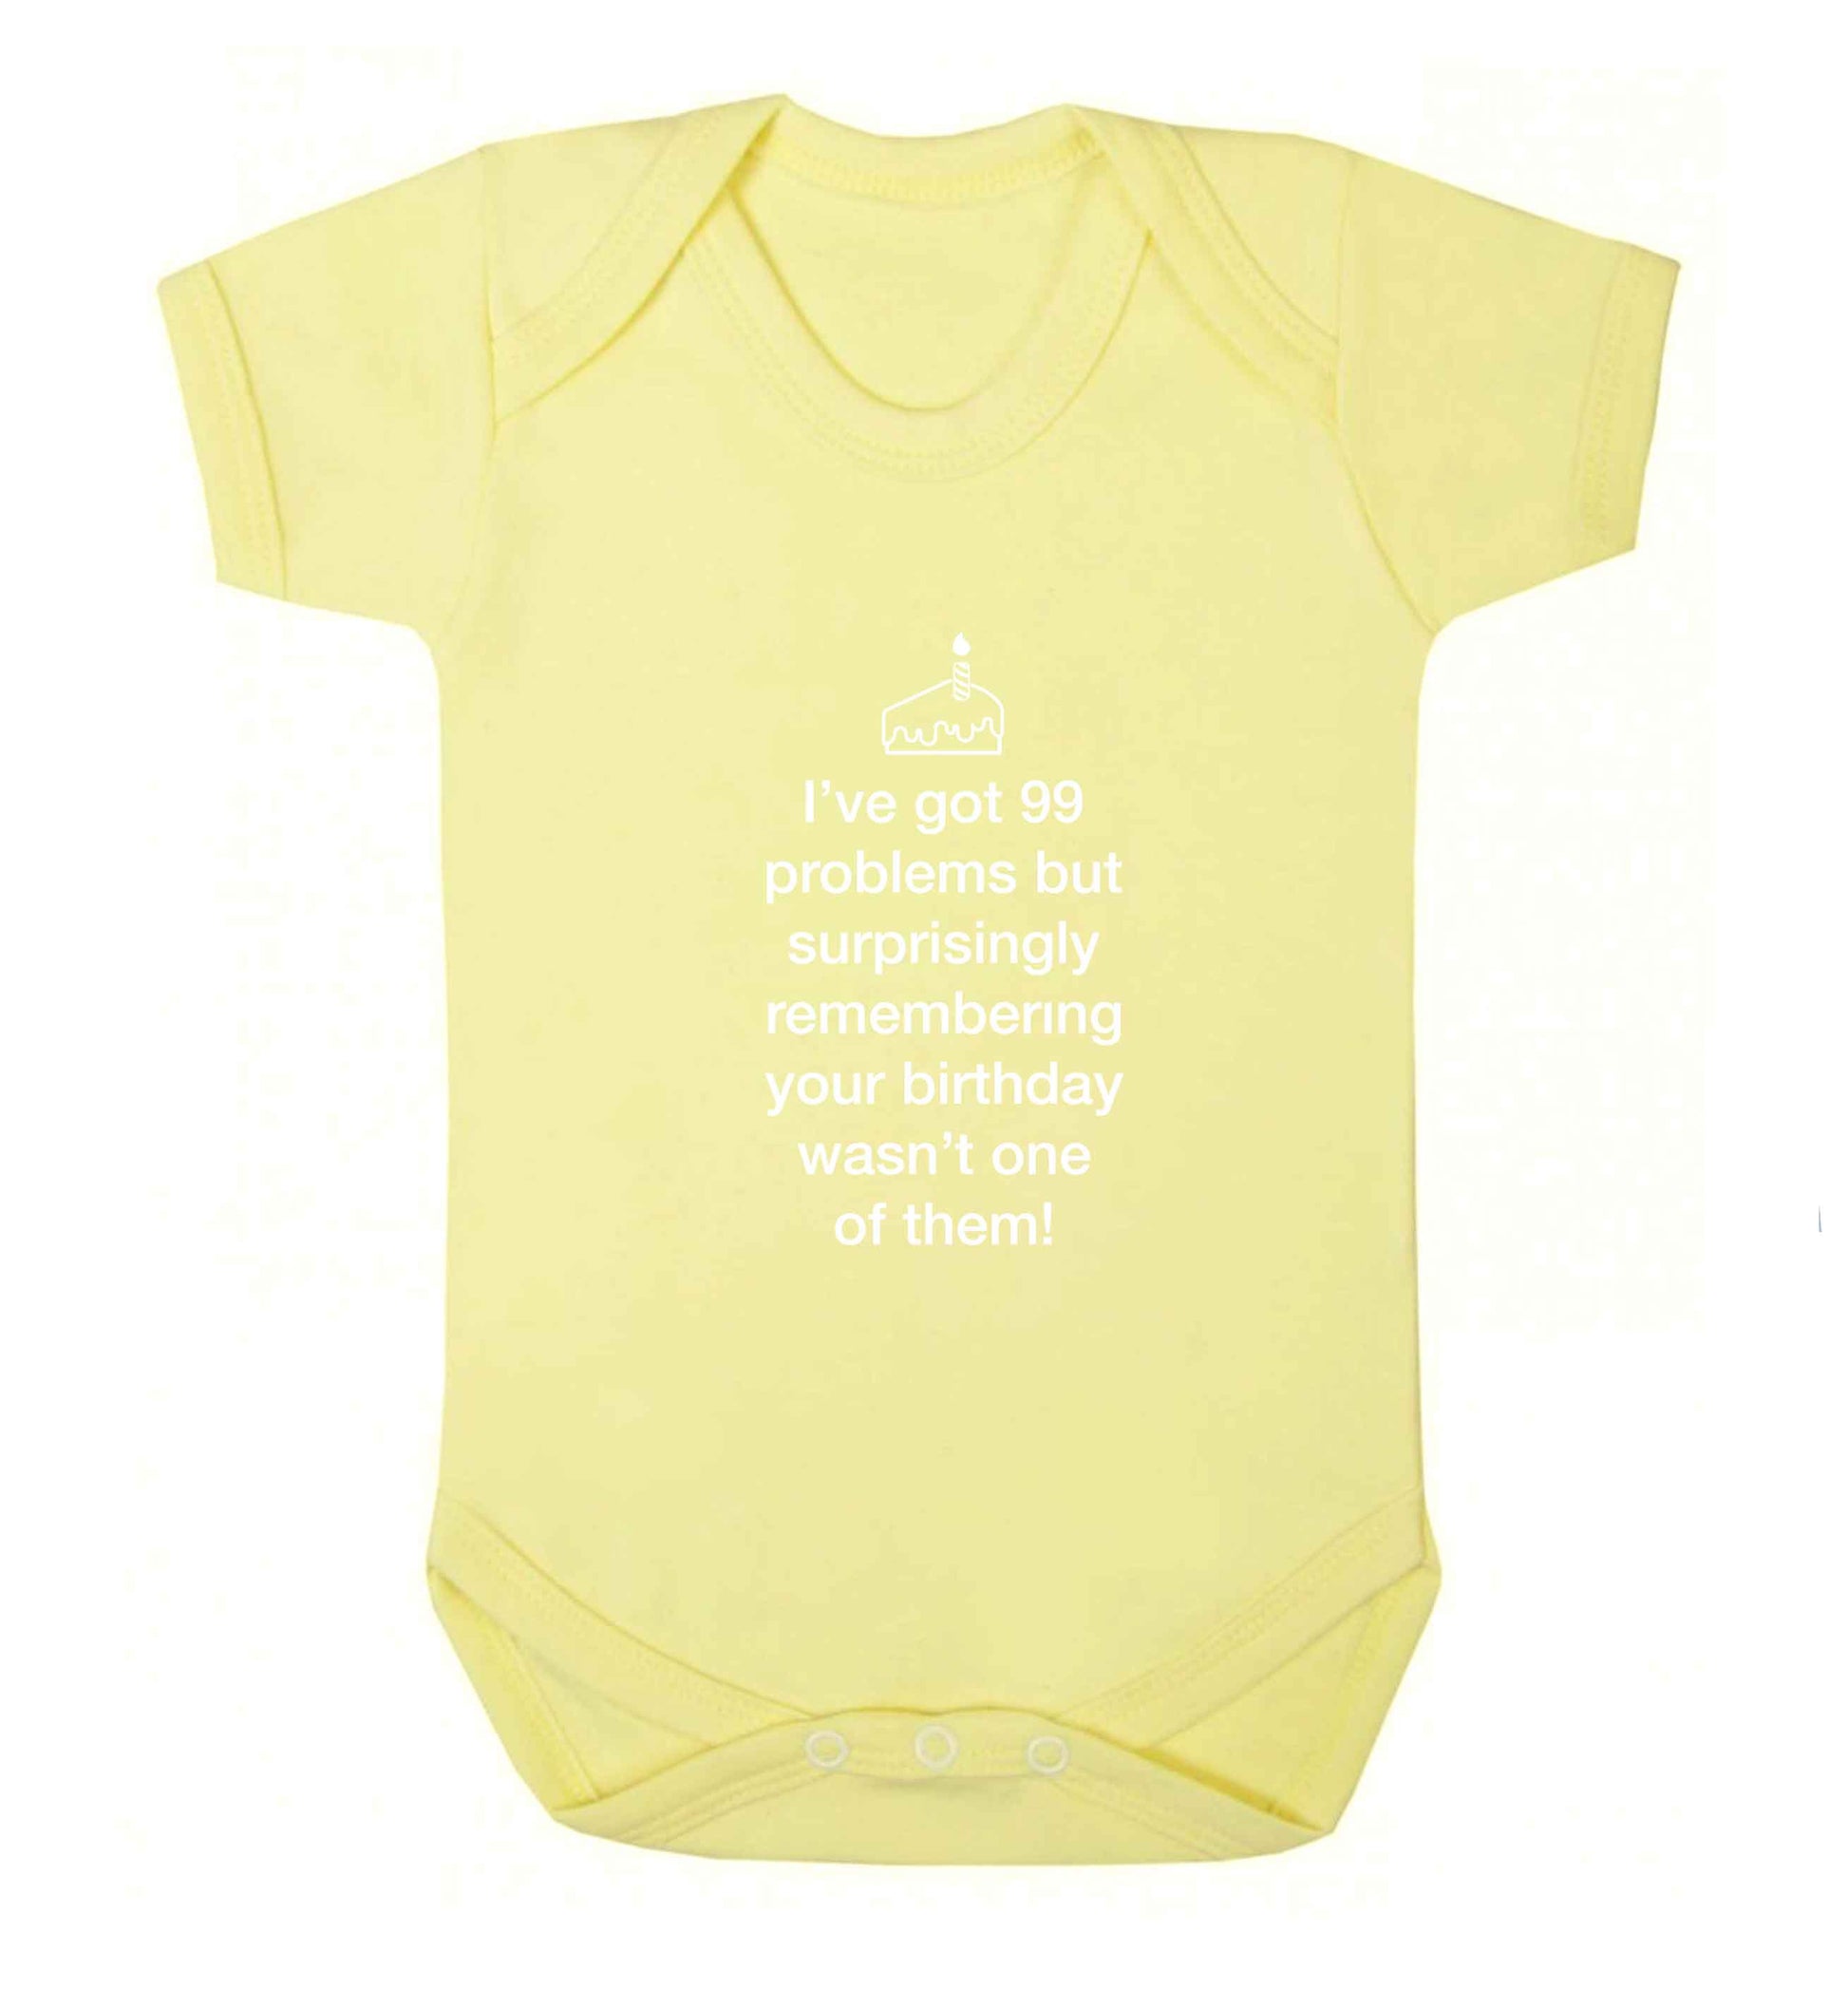 I've got 99 problems but surprisingly remembering your birthday wasn't one of them! baby vest pale yellow 18-24 months